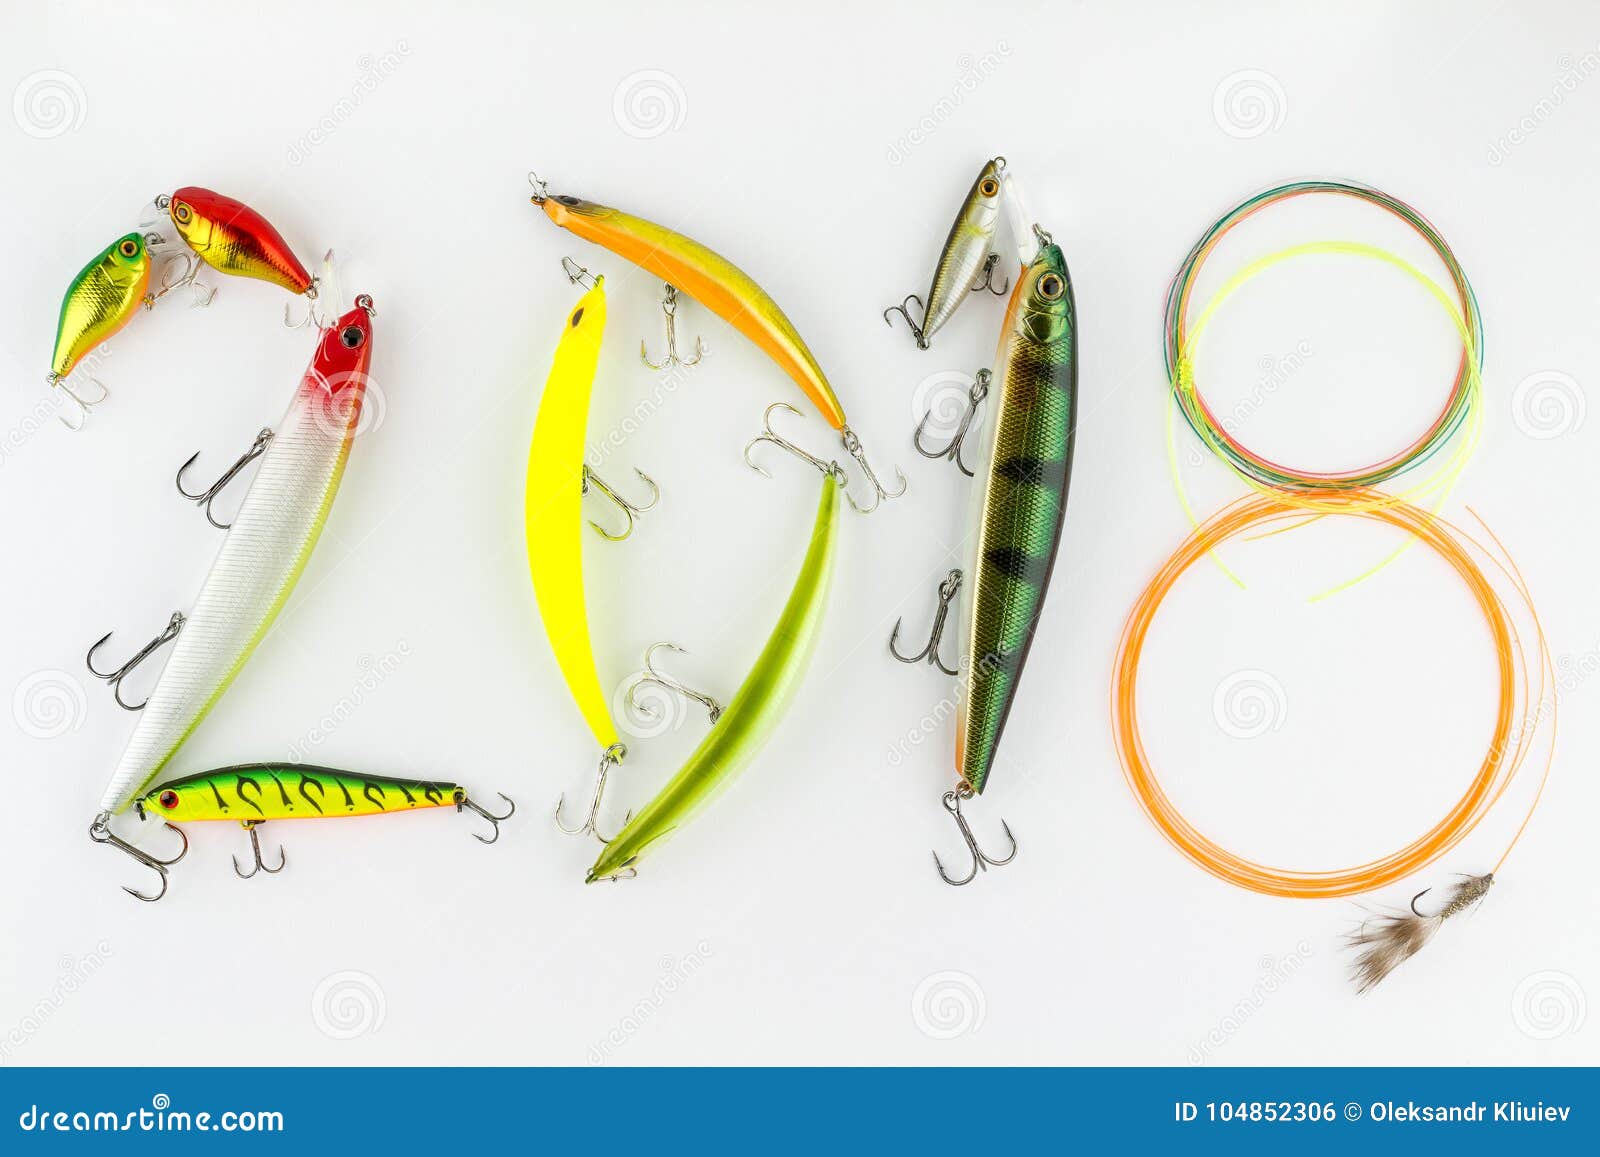 Happy New Year 2018 Compositions with Fishing Lures and Fishing